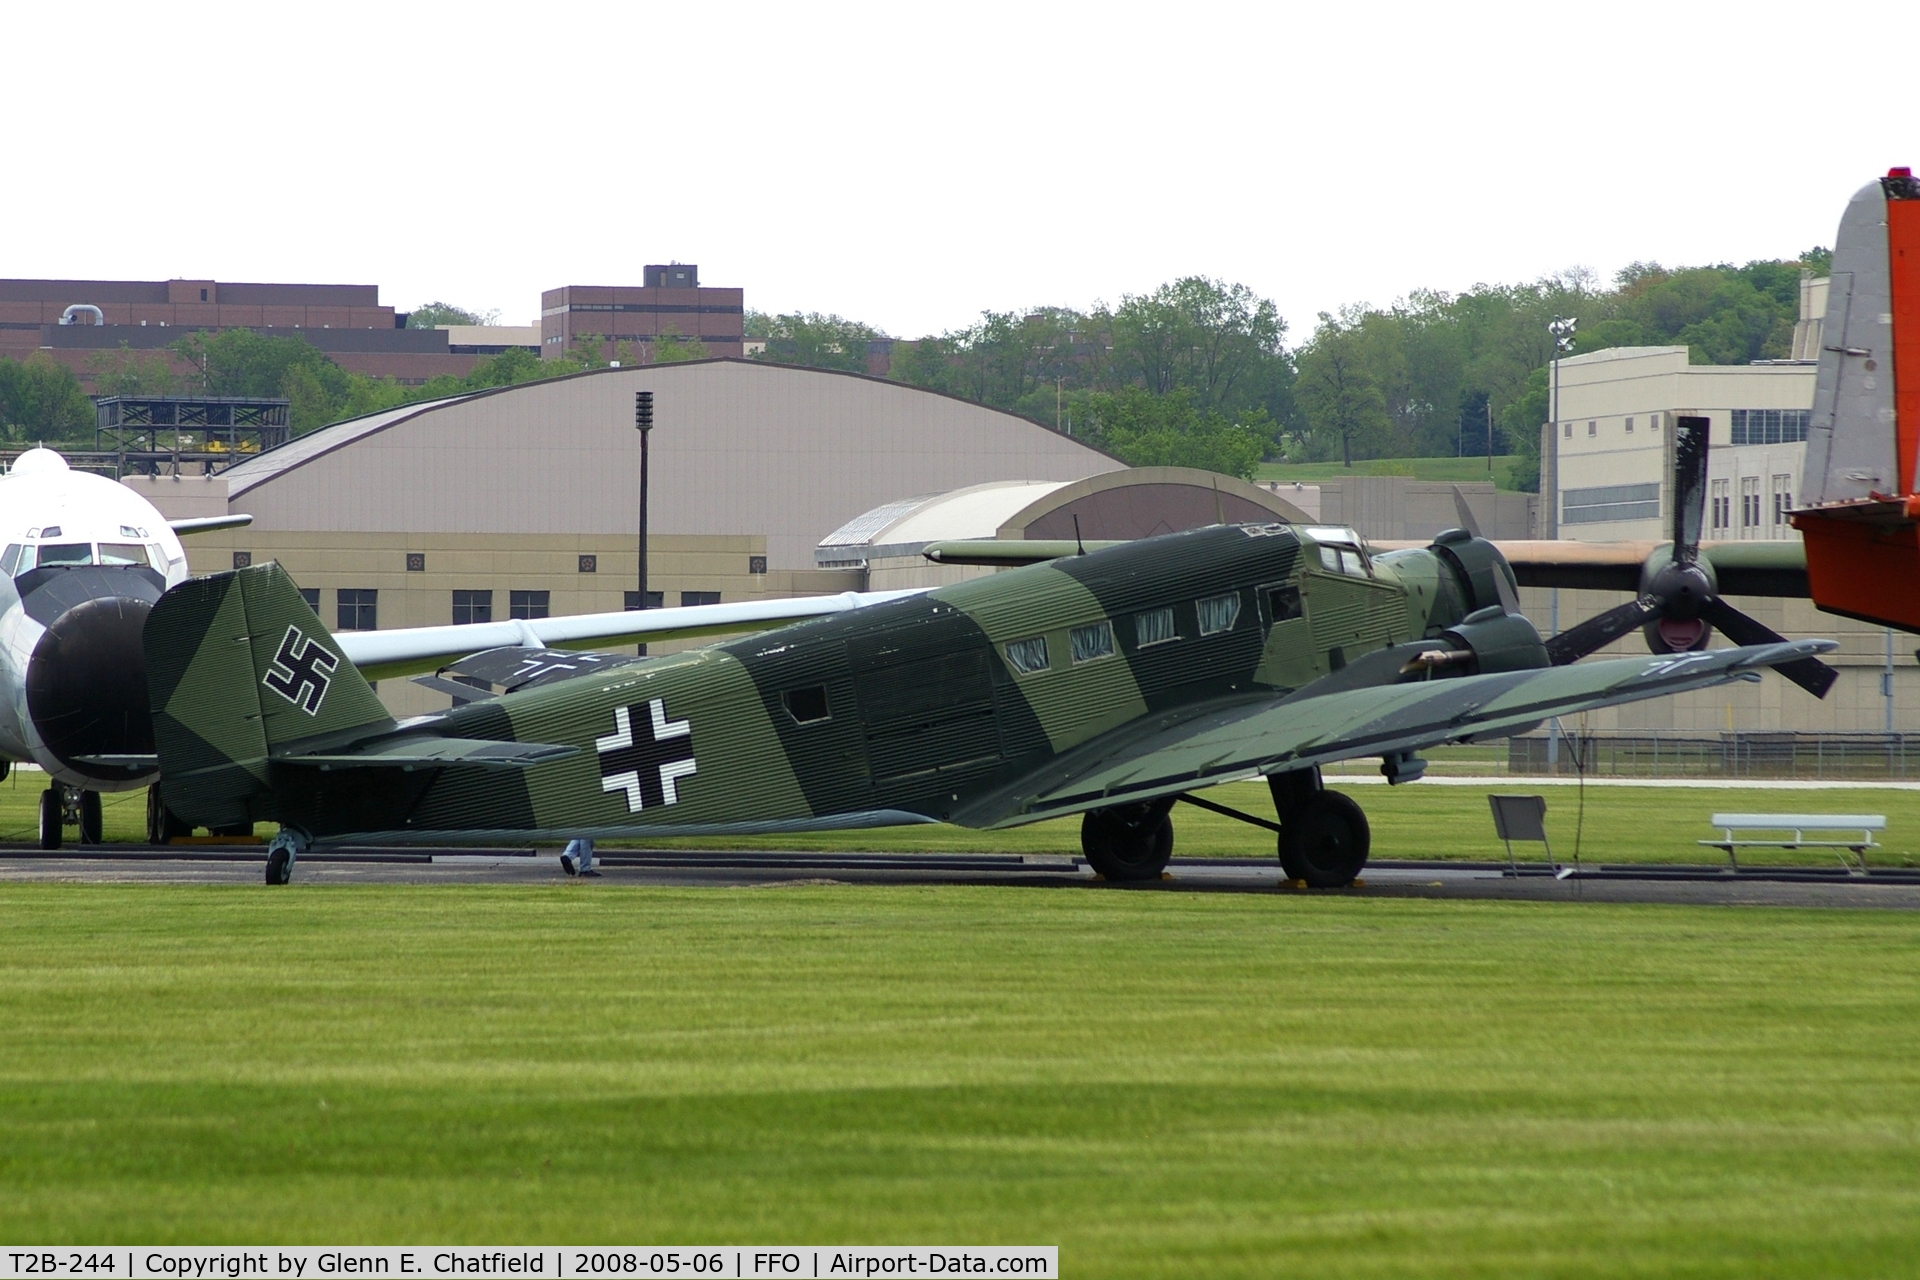 T2B-244, Junkers (CASA) 352L (Ju-52) C/N 135, Displayed at the National Museum of the U.S. Air Force